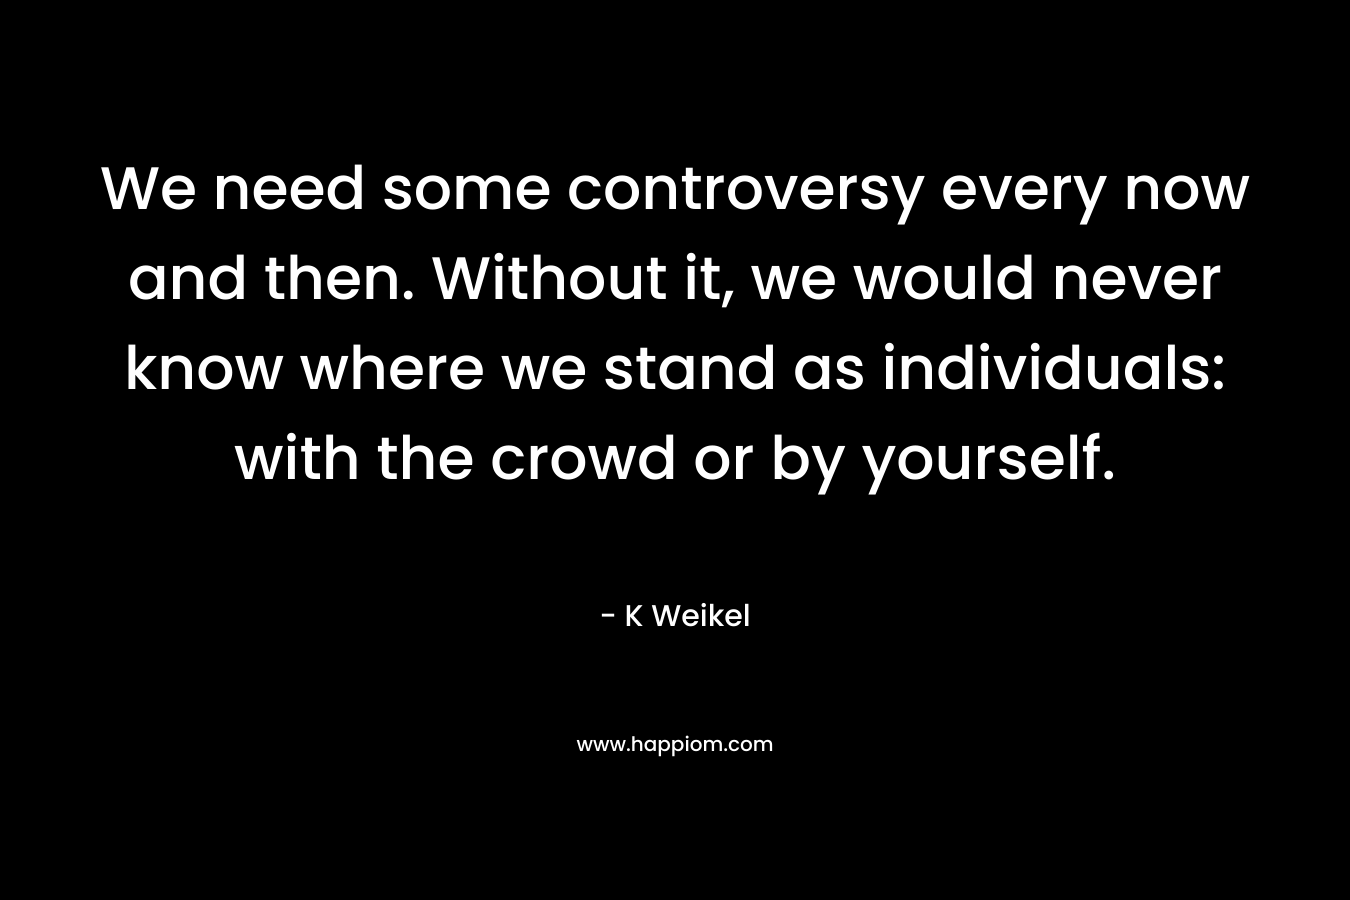 We need some controversy every now and then. Without it, we would never know where we stand as individuals: with the crowd or by yourself. – K Weikel